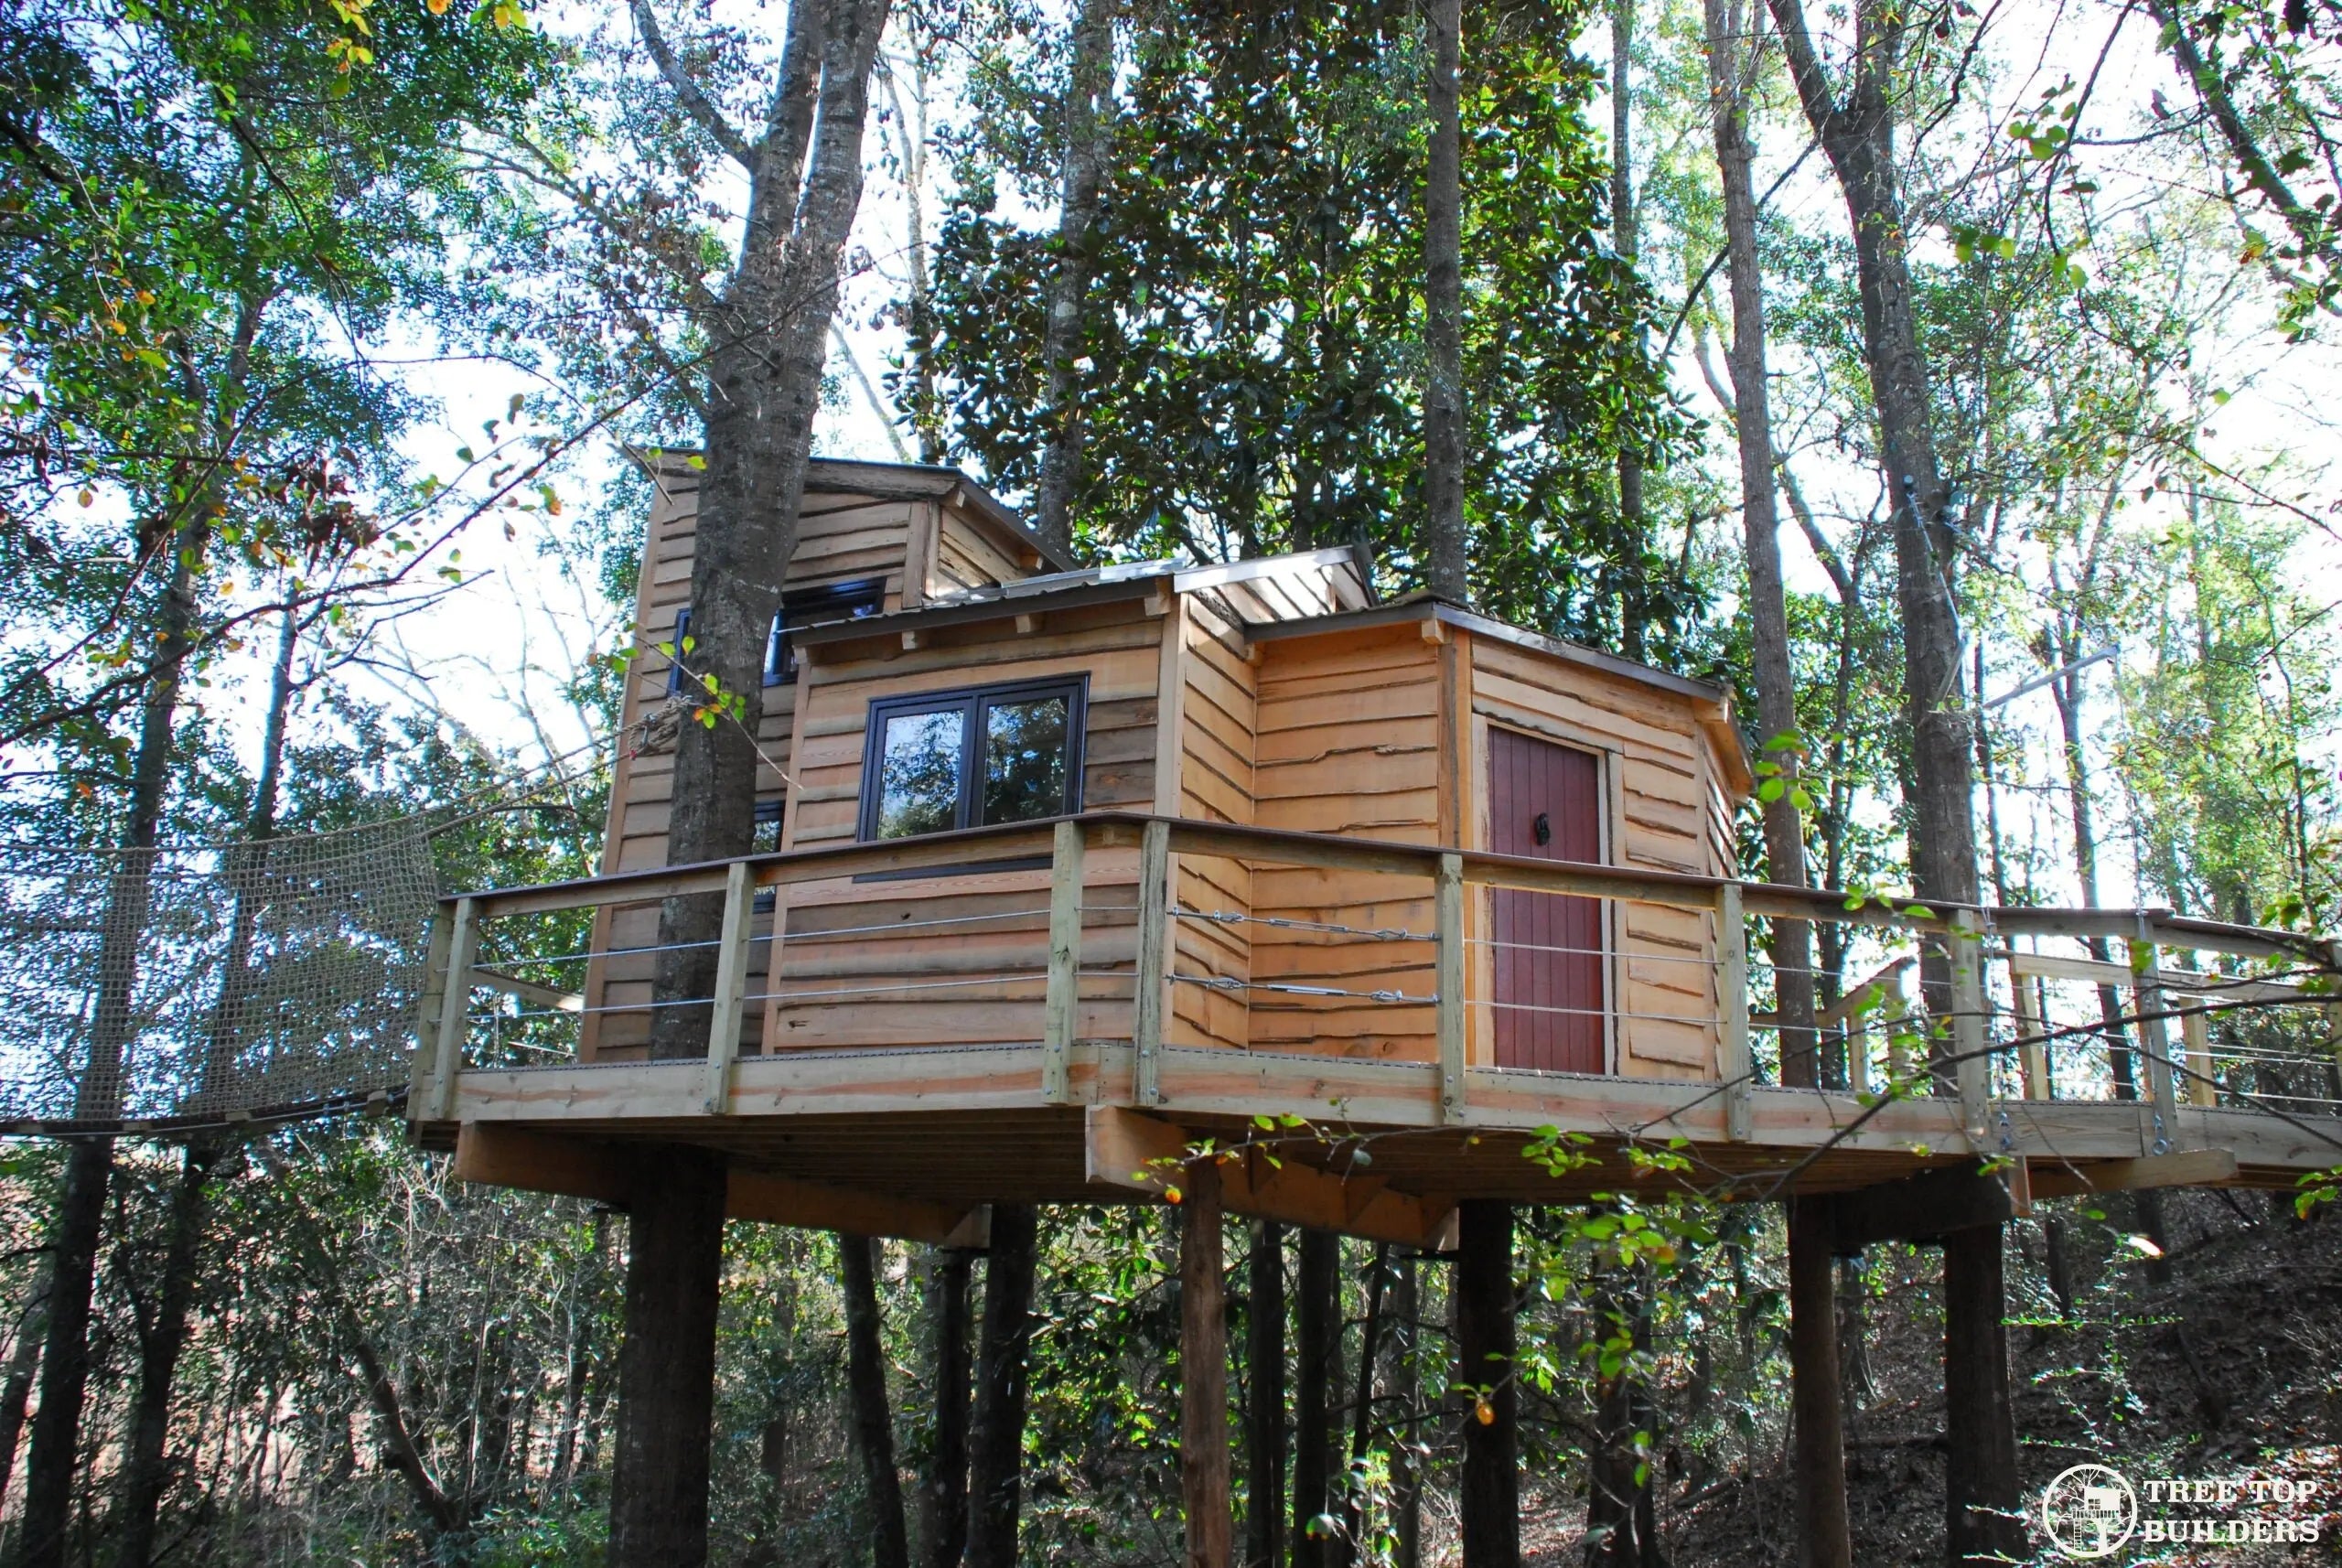 Tree Top BuildersThe Weight-Bearing Capacity of a Tree House